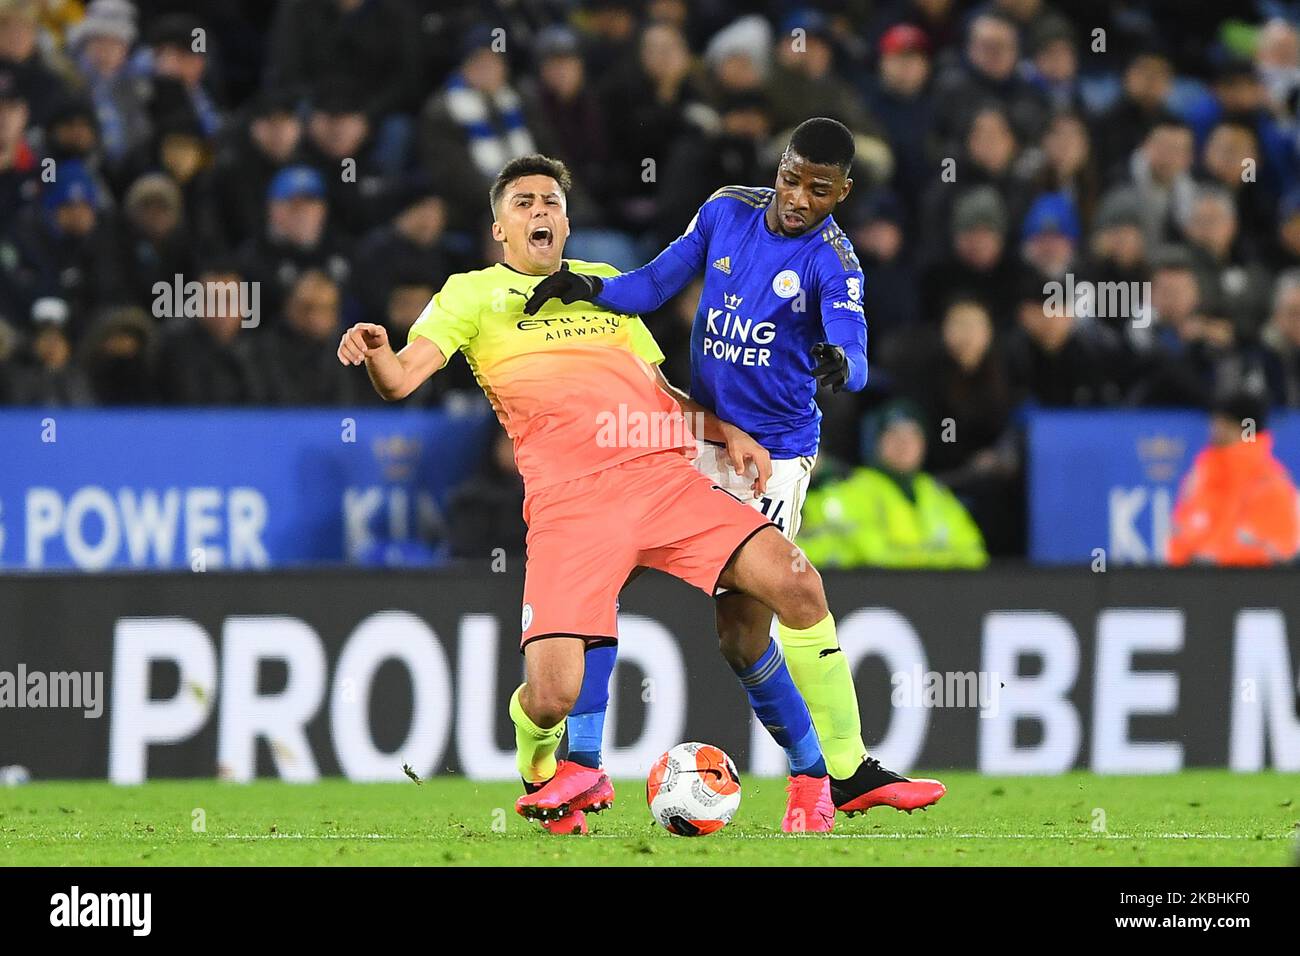 Kelechi Iheanacho (14) of Leicester City fouls Rodrigo (16) of Manchester City during the Premier League match between Leicester City and Manchester City at the King Power Stadium, Leicester on Saturday 22nd February 2020. (Photo by Jon Hobley/MI News/NurPhoto) Stock Photo